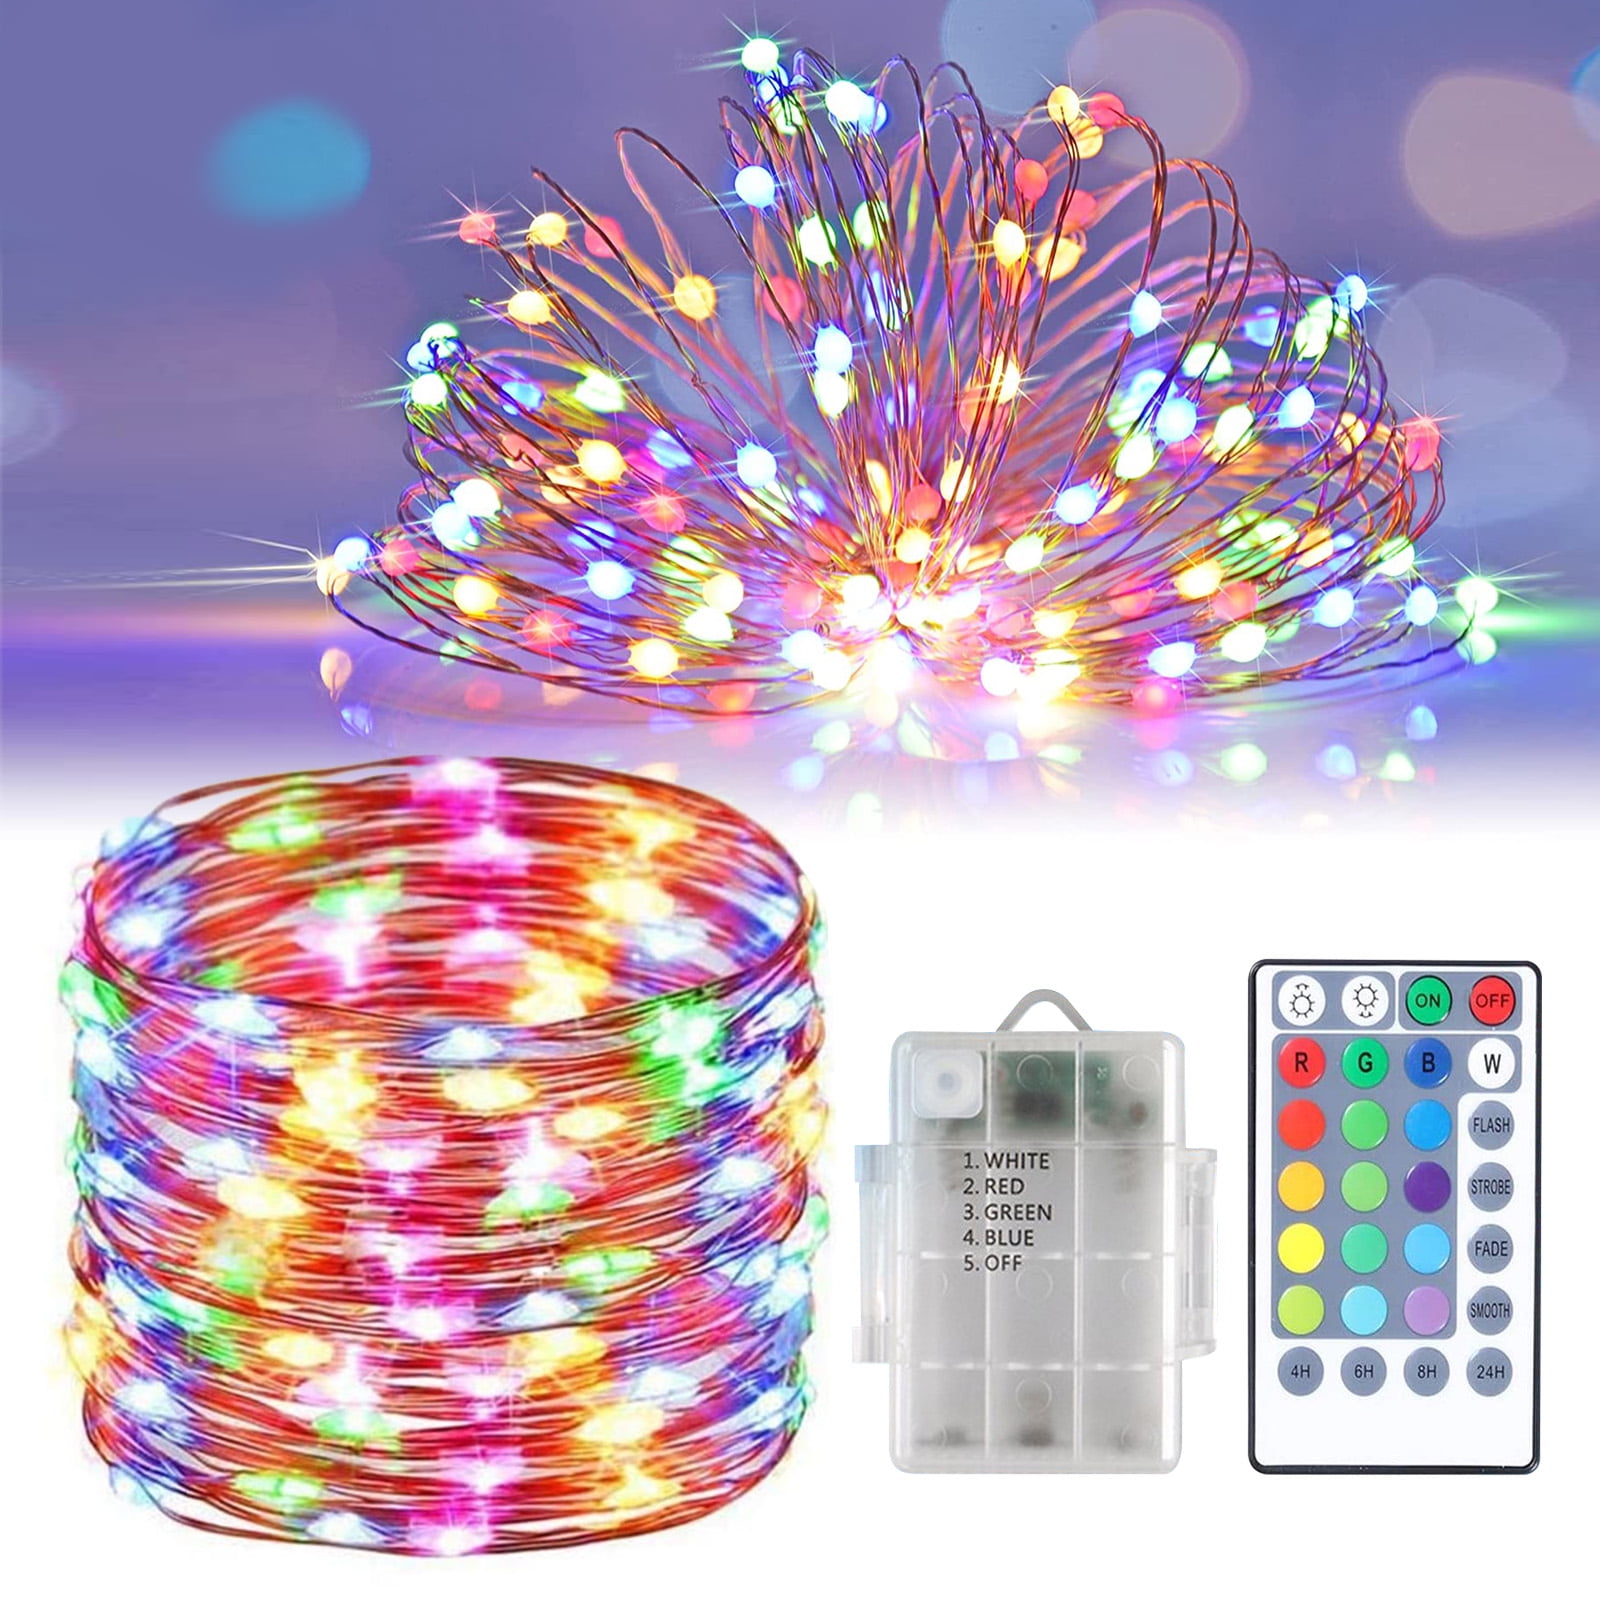 50-100 LEDS Battery Operated Mini LED Copper Wire String Fairy Lights W/ Remote 